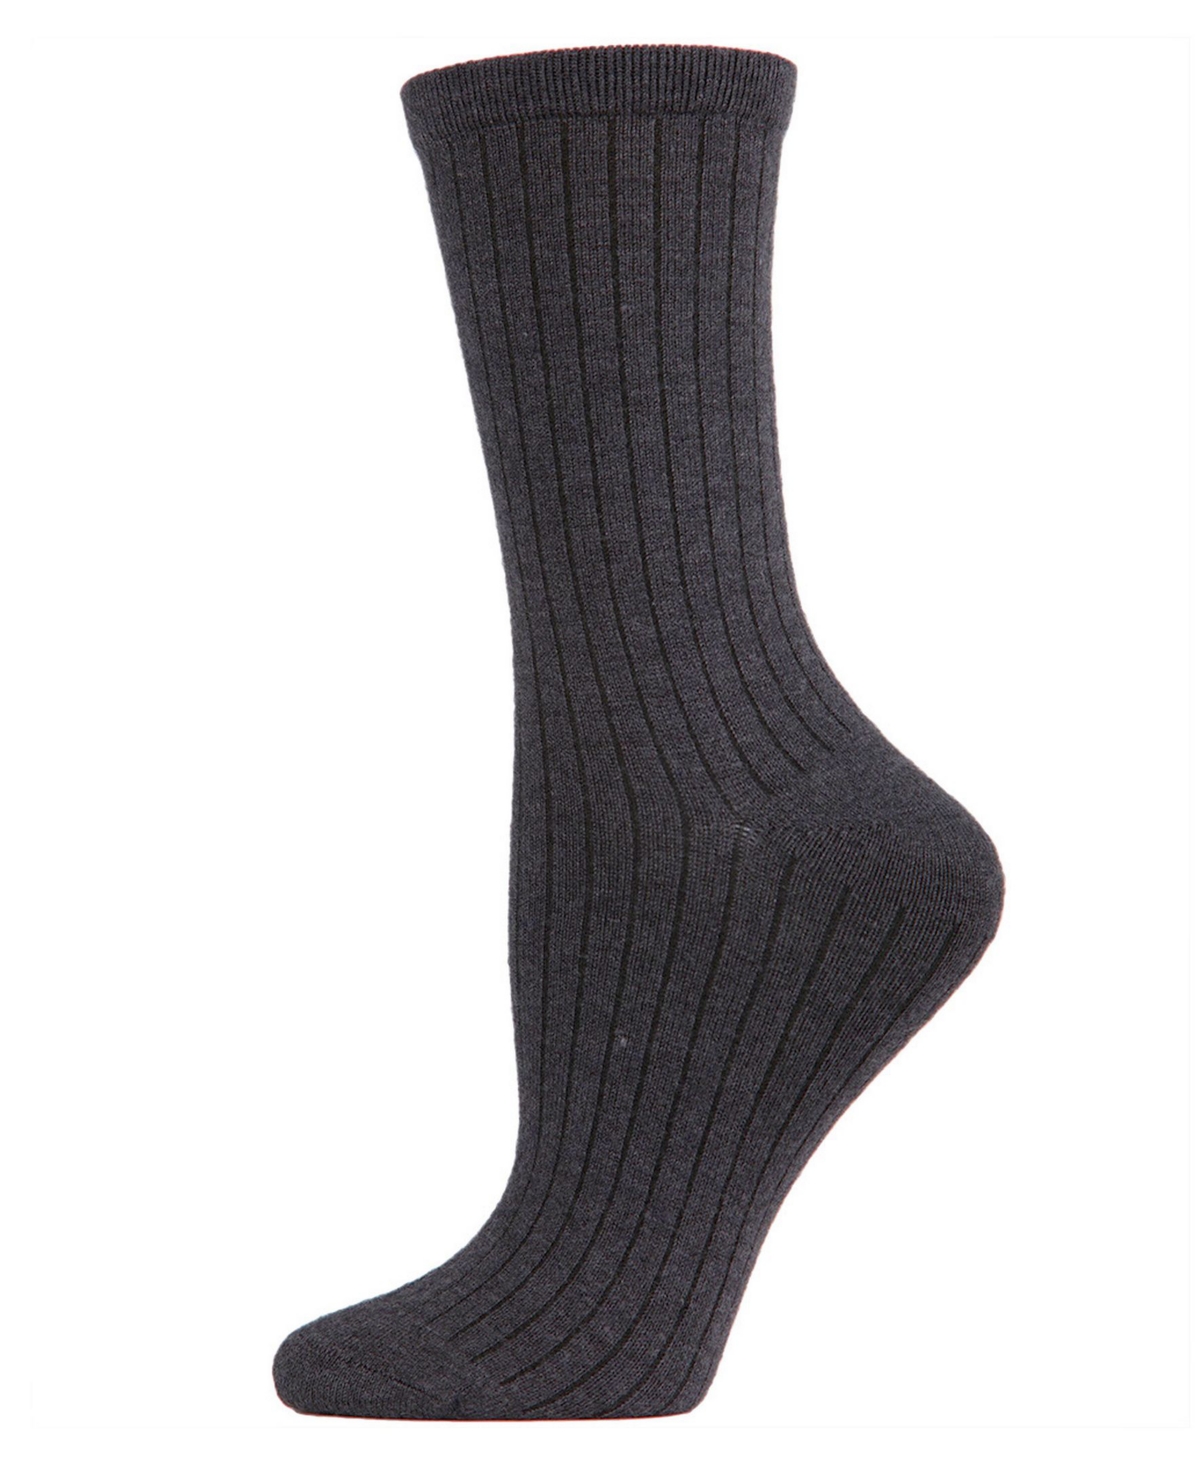 Women's Solid Ribbed Knit Cashmere Blend Crew Socks - Dark Gray